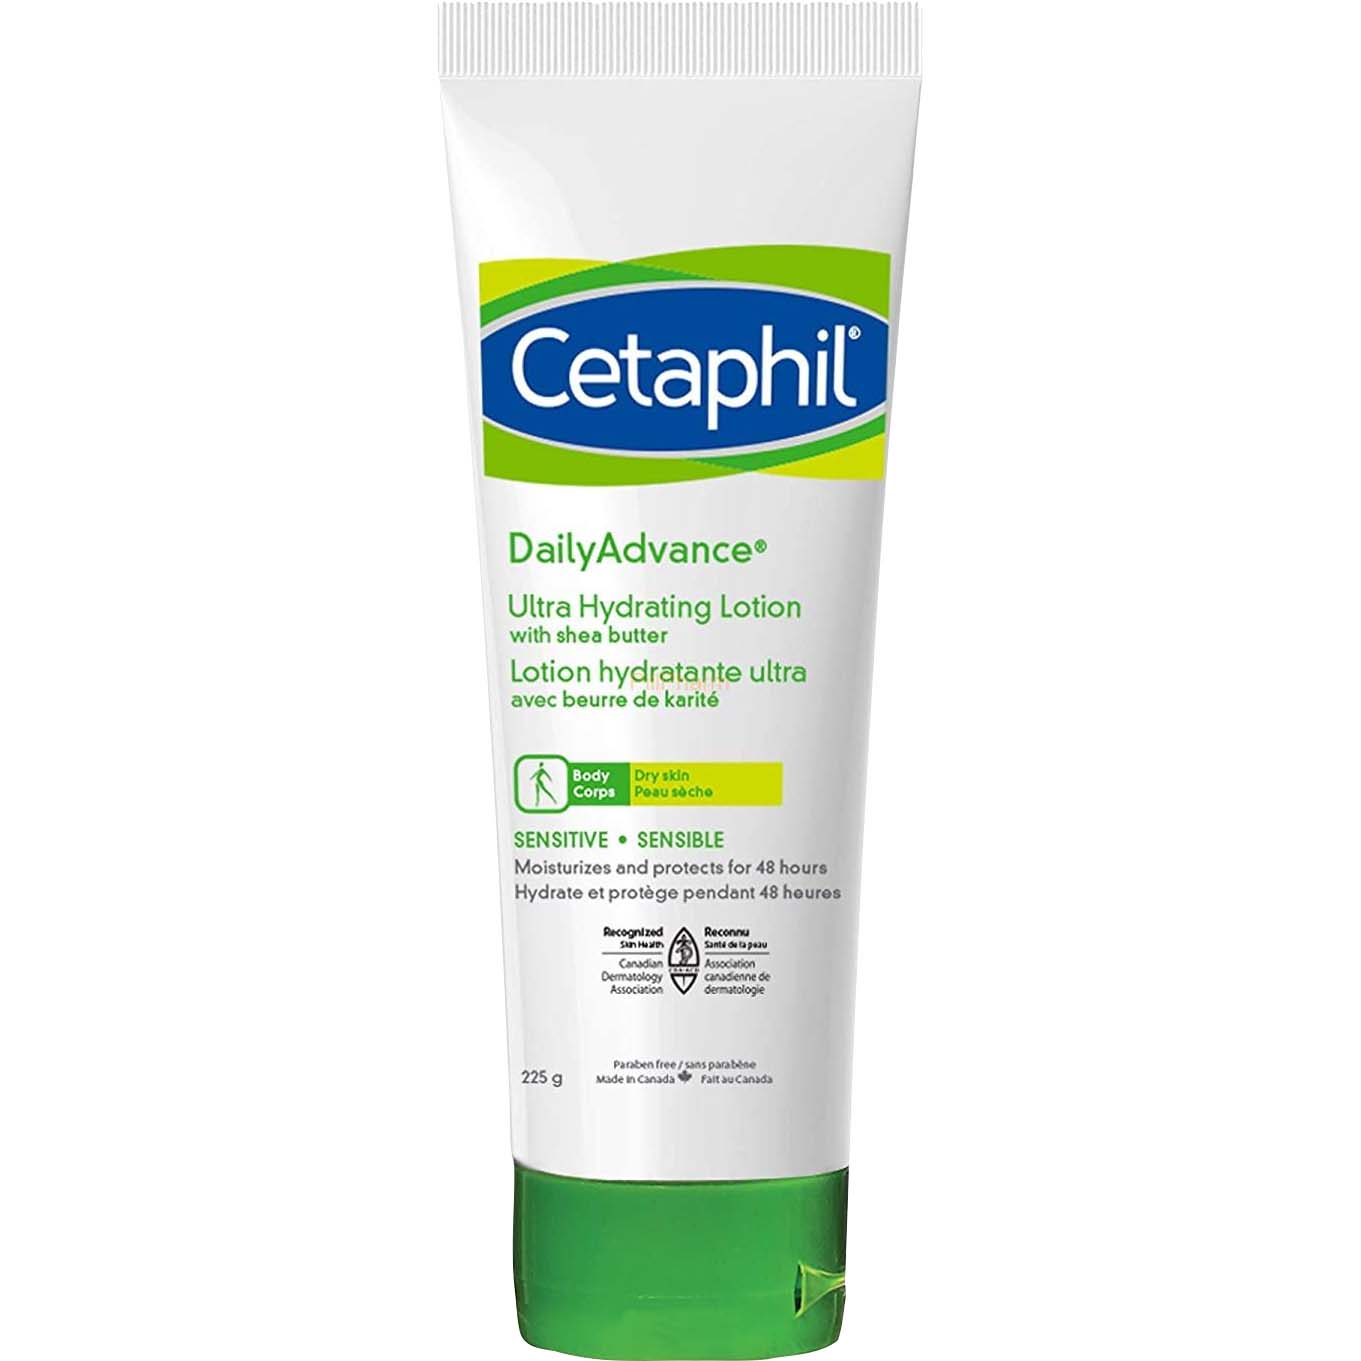 Cetaphil Daily Advance Ultra Hydrating Lotion 225 GM